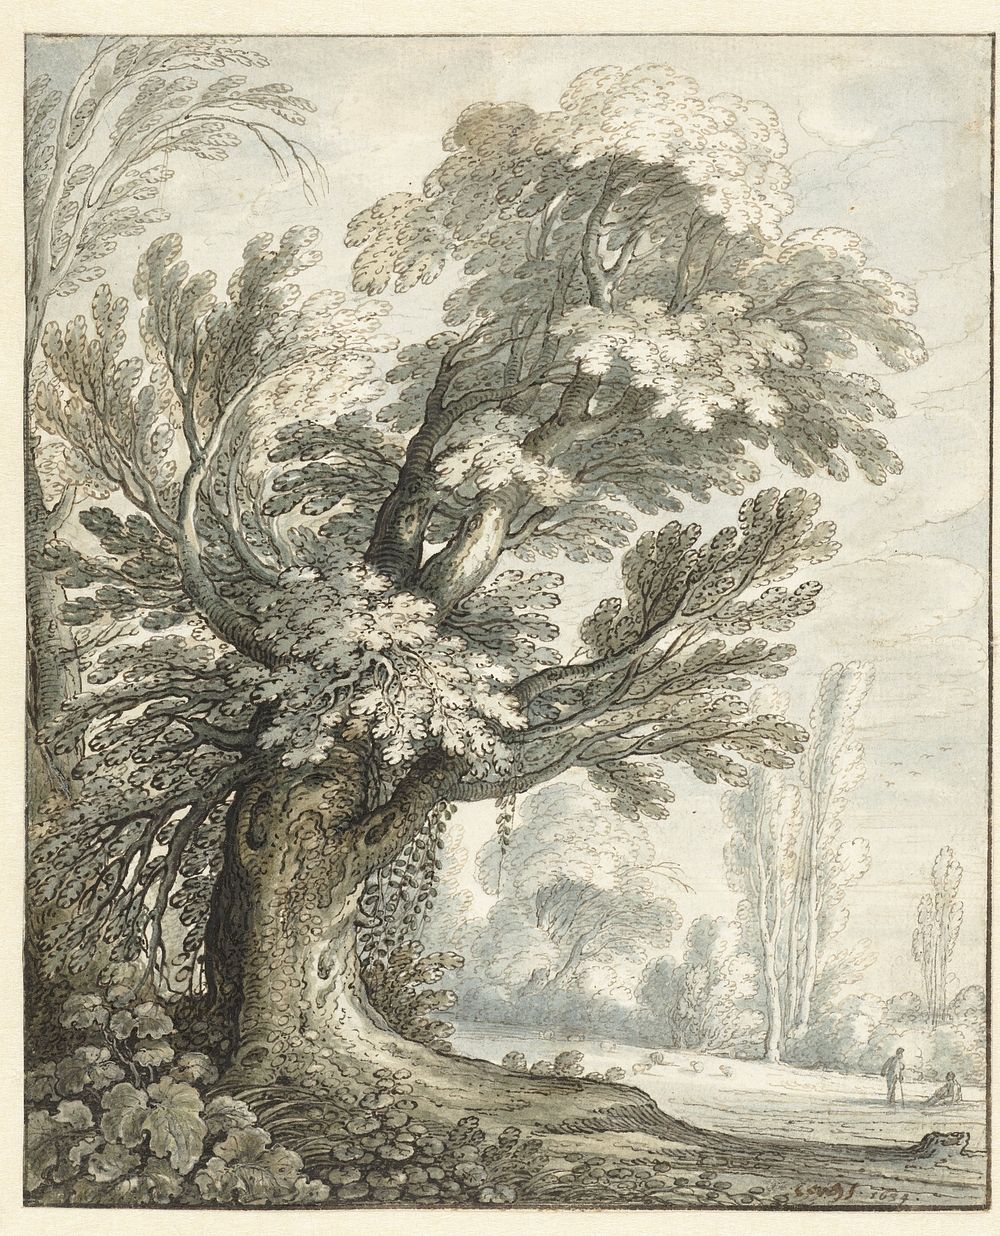 Landscape with a Tall Tree (1634) by Marten de Cock and Alexander Keirincx